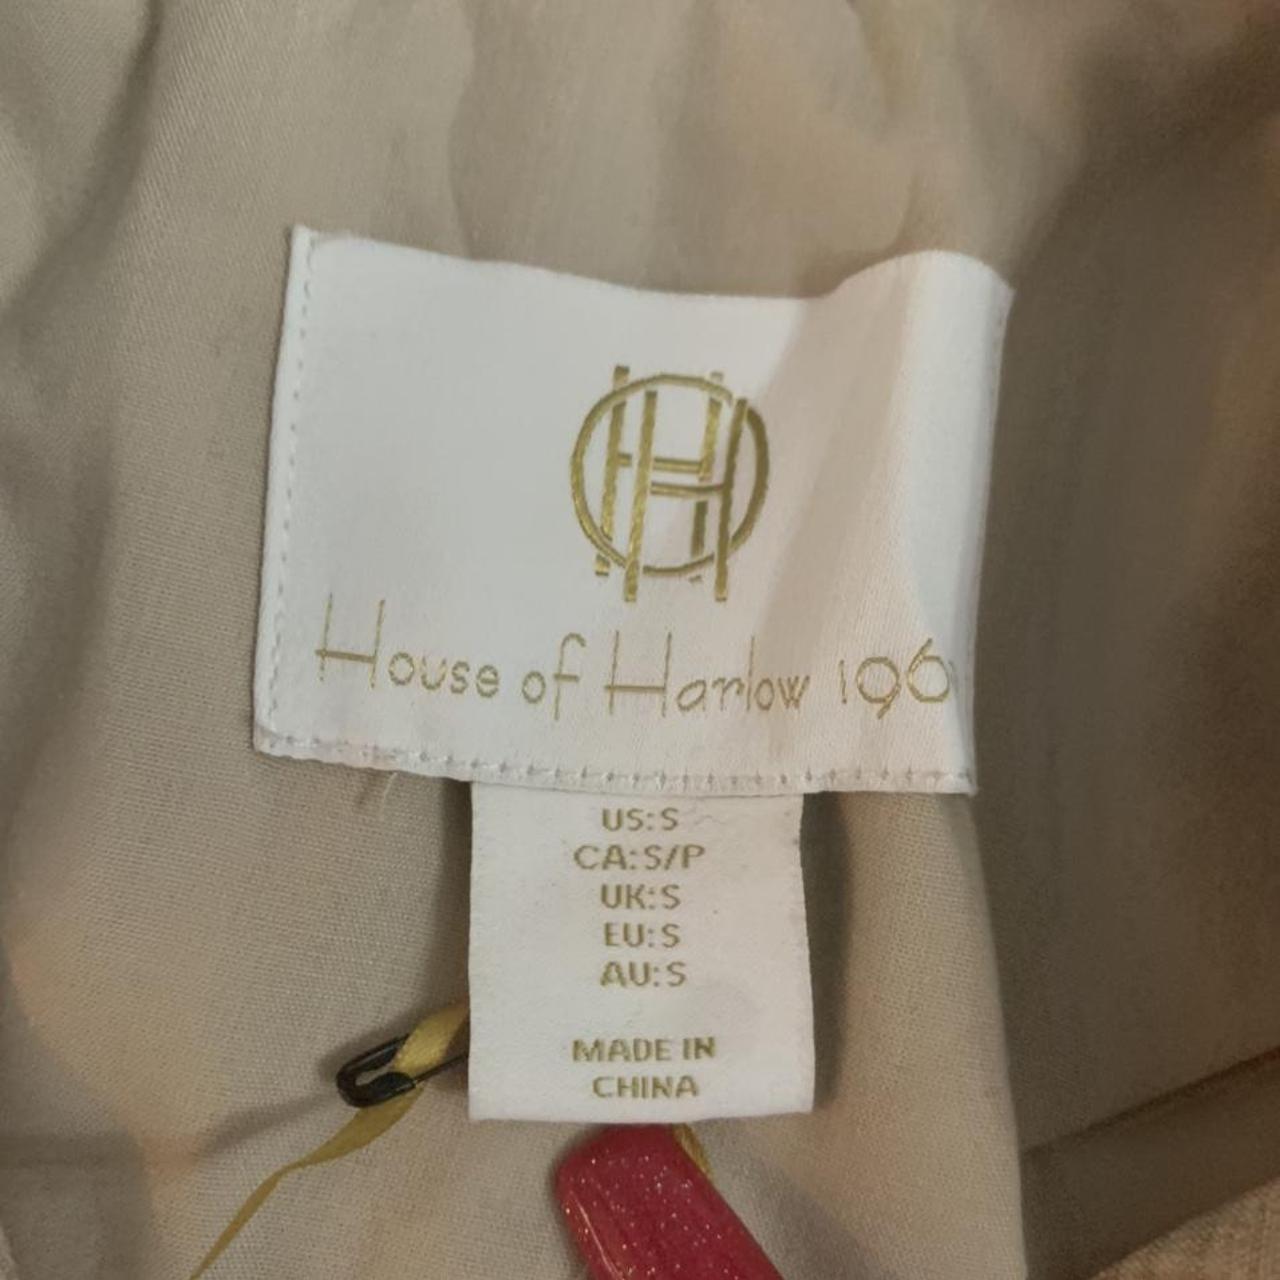 House of Harlow Women's Tan and Grey Jacket (2)